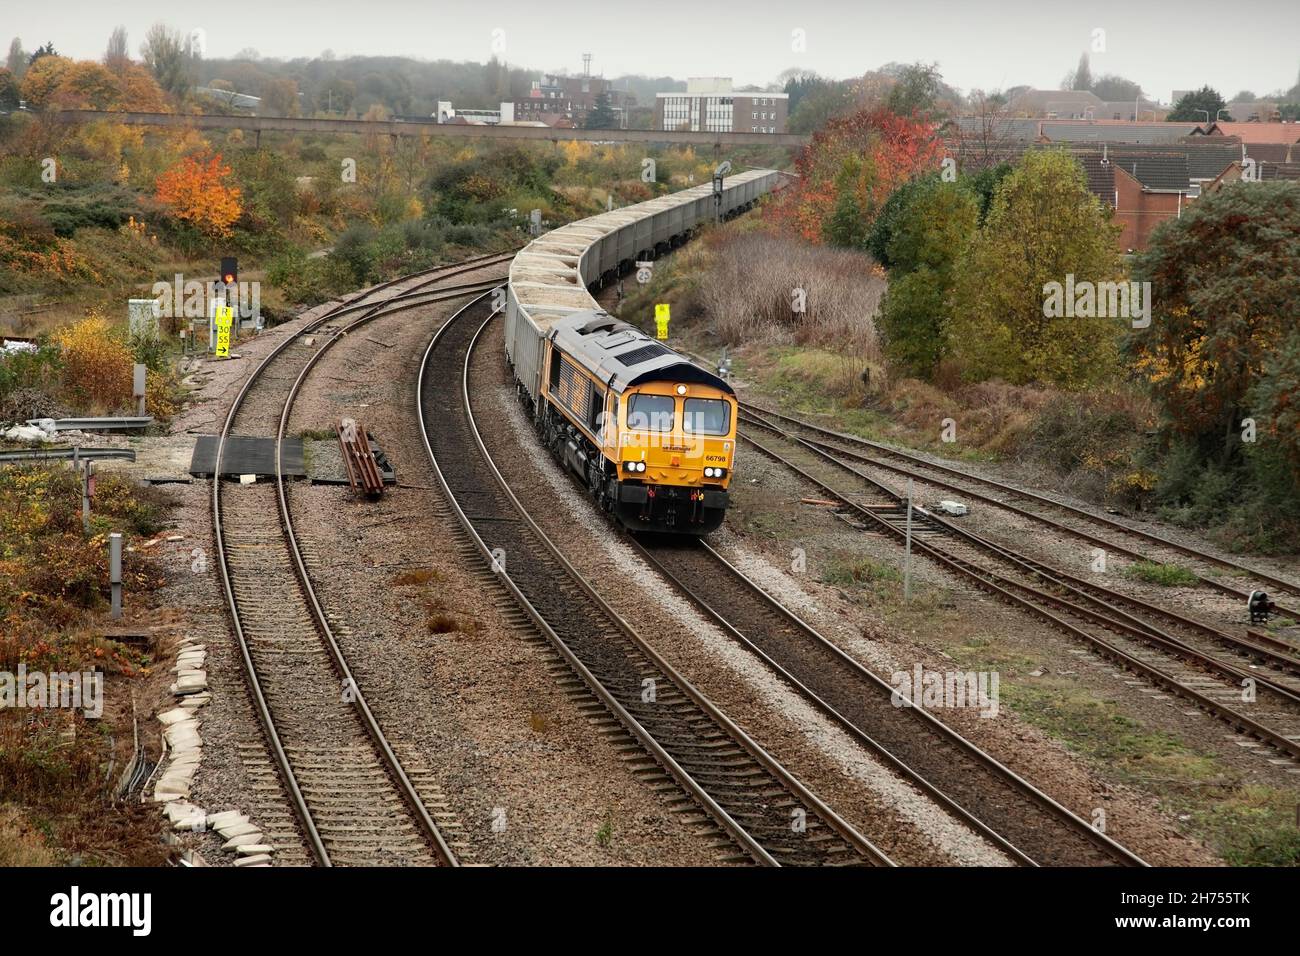 GB Railfreight Class 66 loco 66798 hauls the 6E57 0410 Renwick Rd (Barking) to Scunthorpe Roxby Gullet waste service through Scunthorpe on 17/11/21. Stock Photo